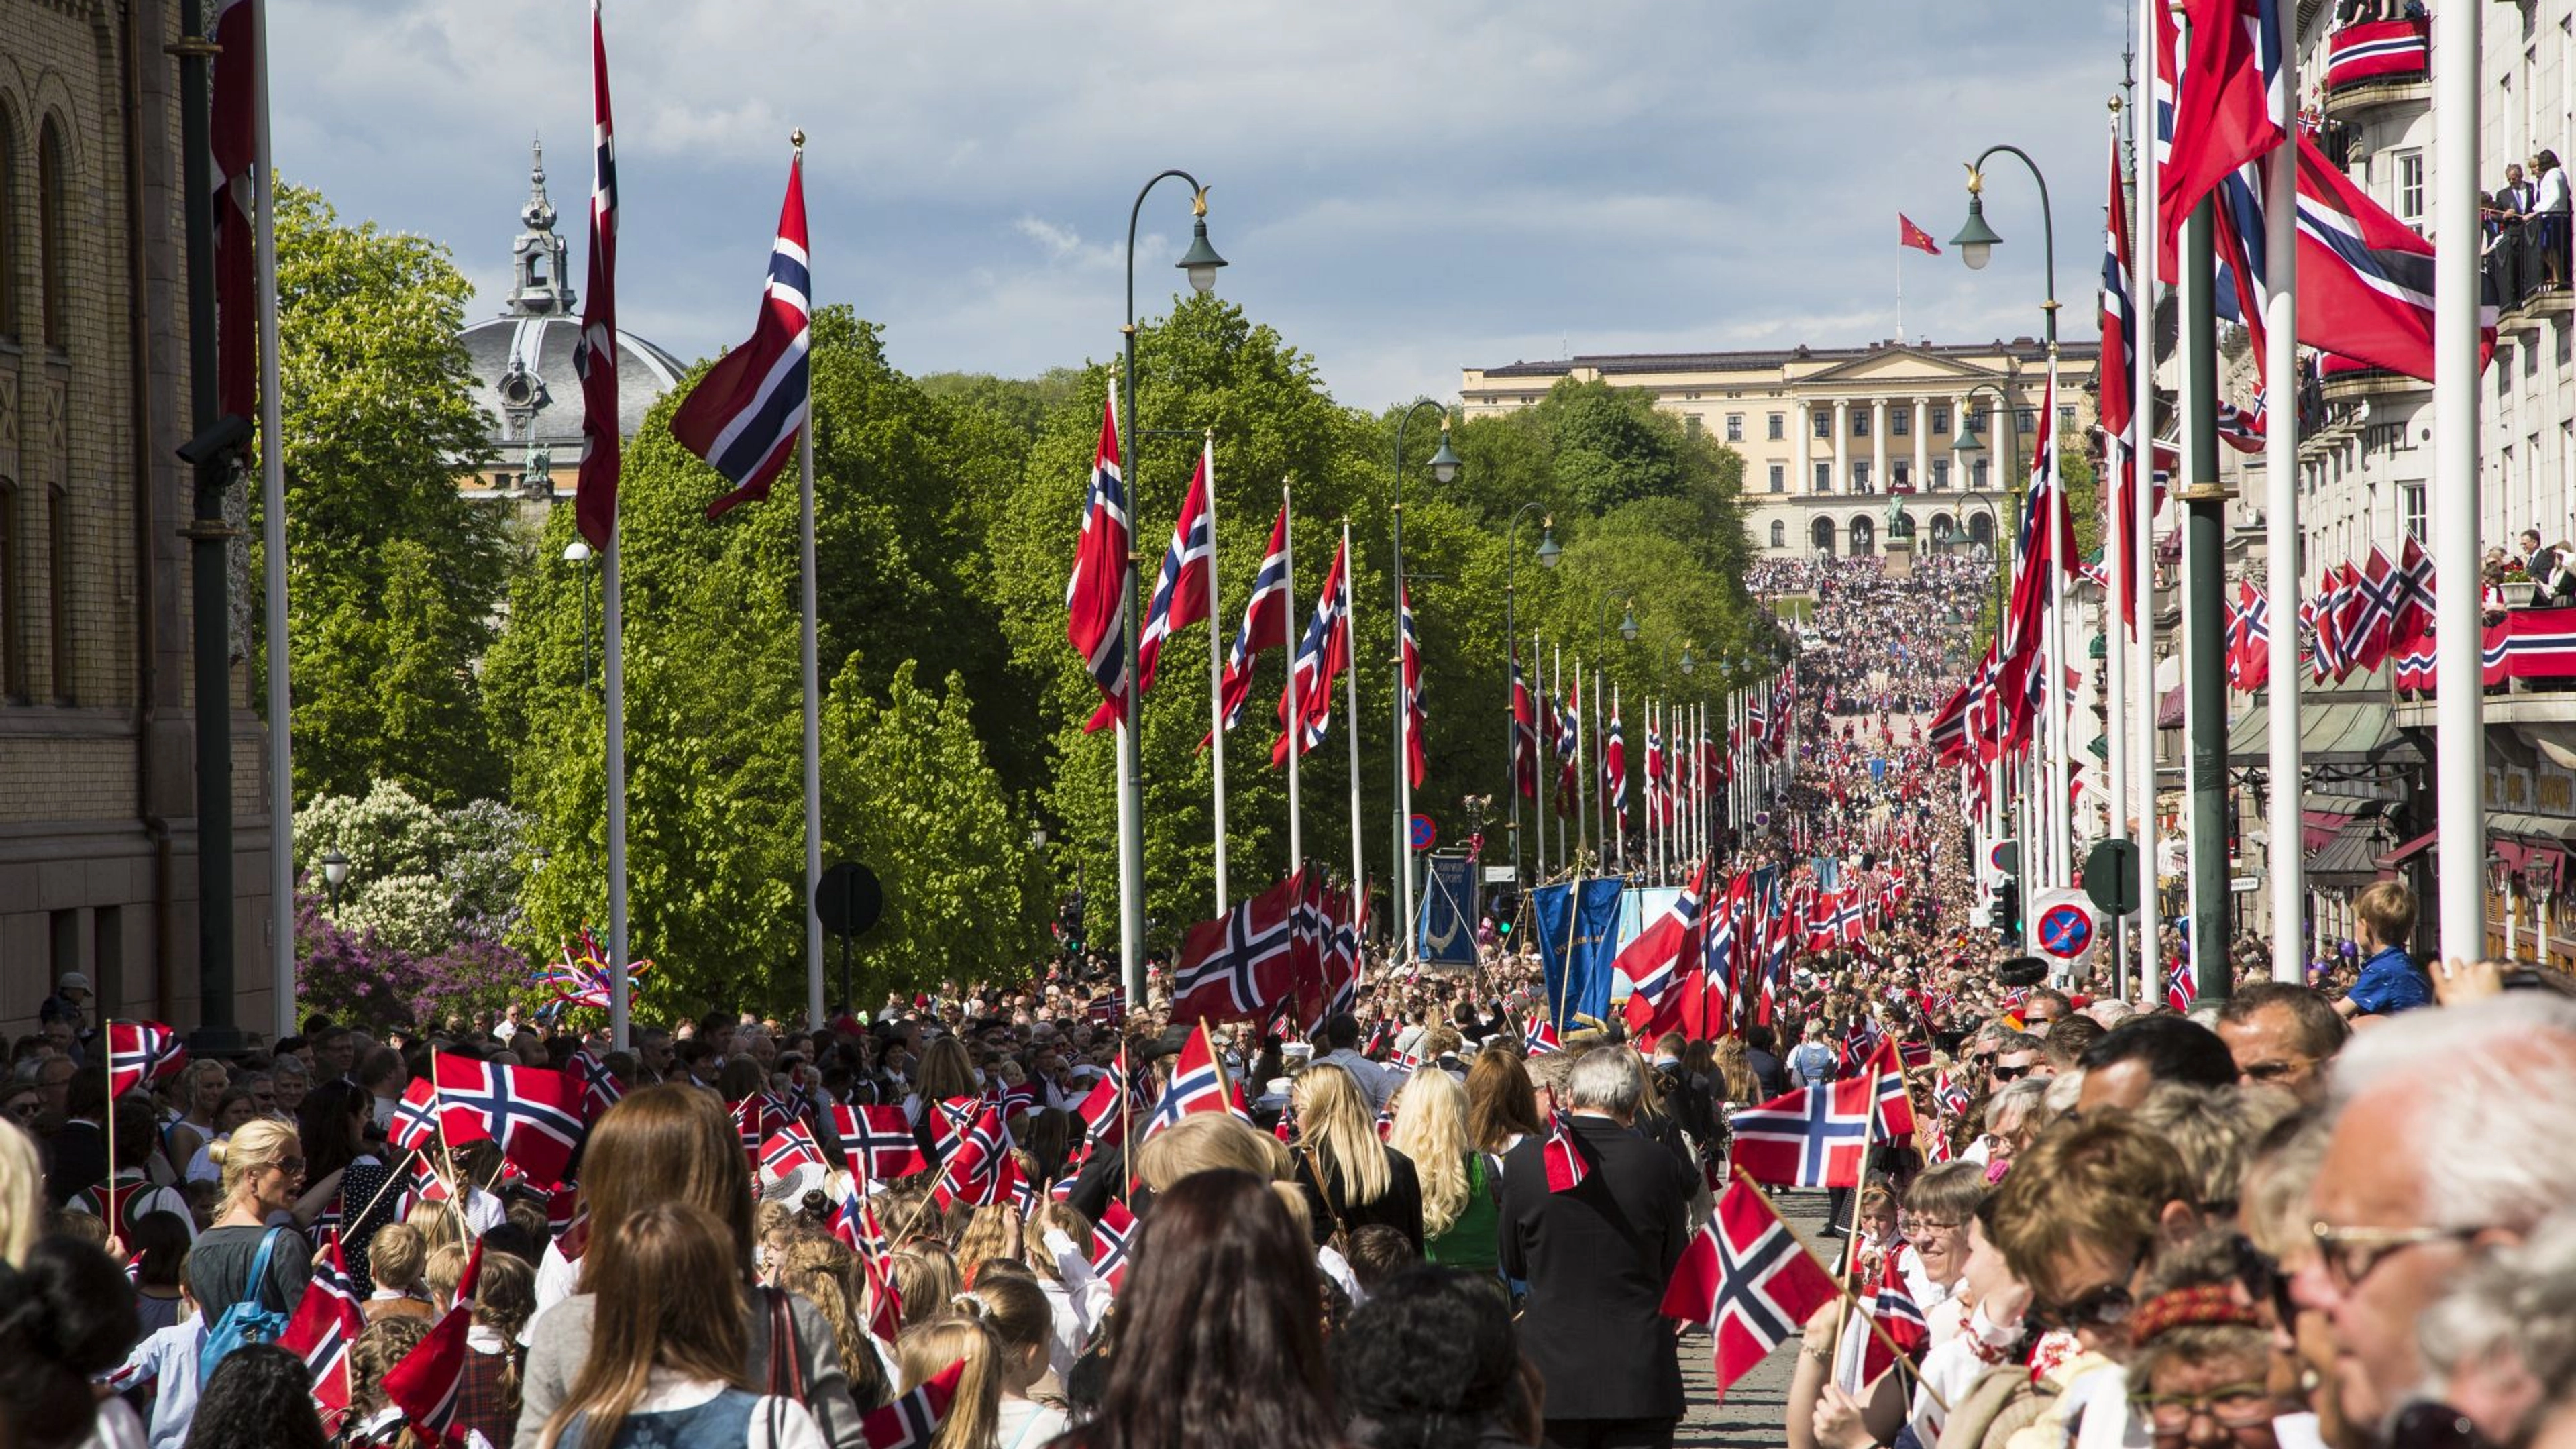 Constitunional day in Oslo - Norway